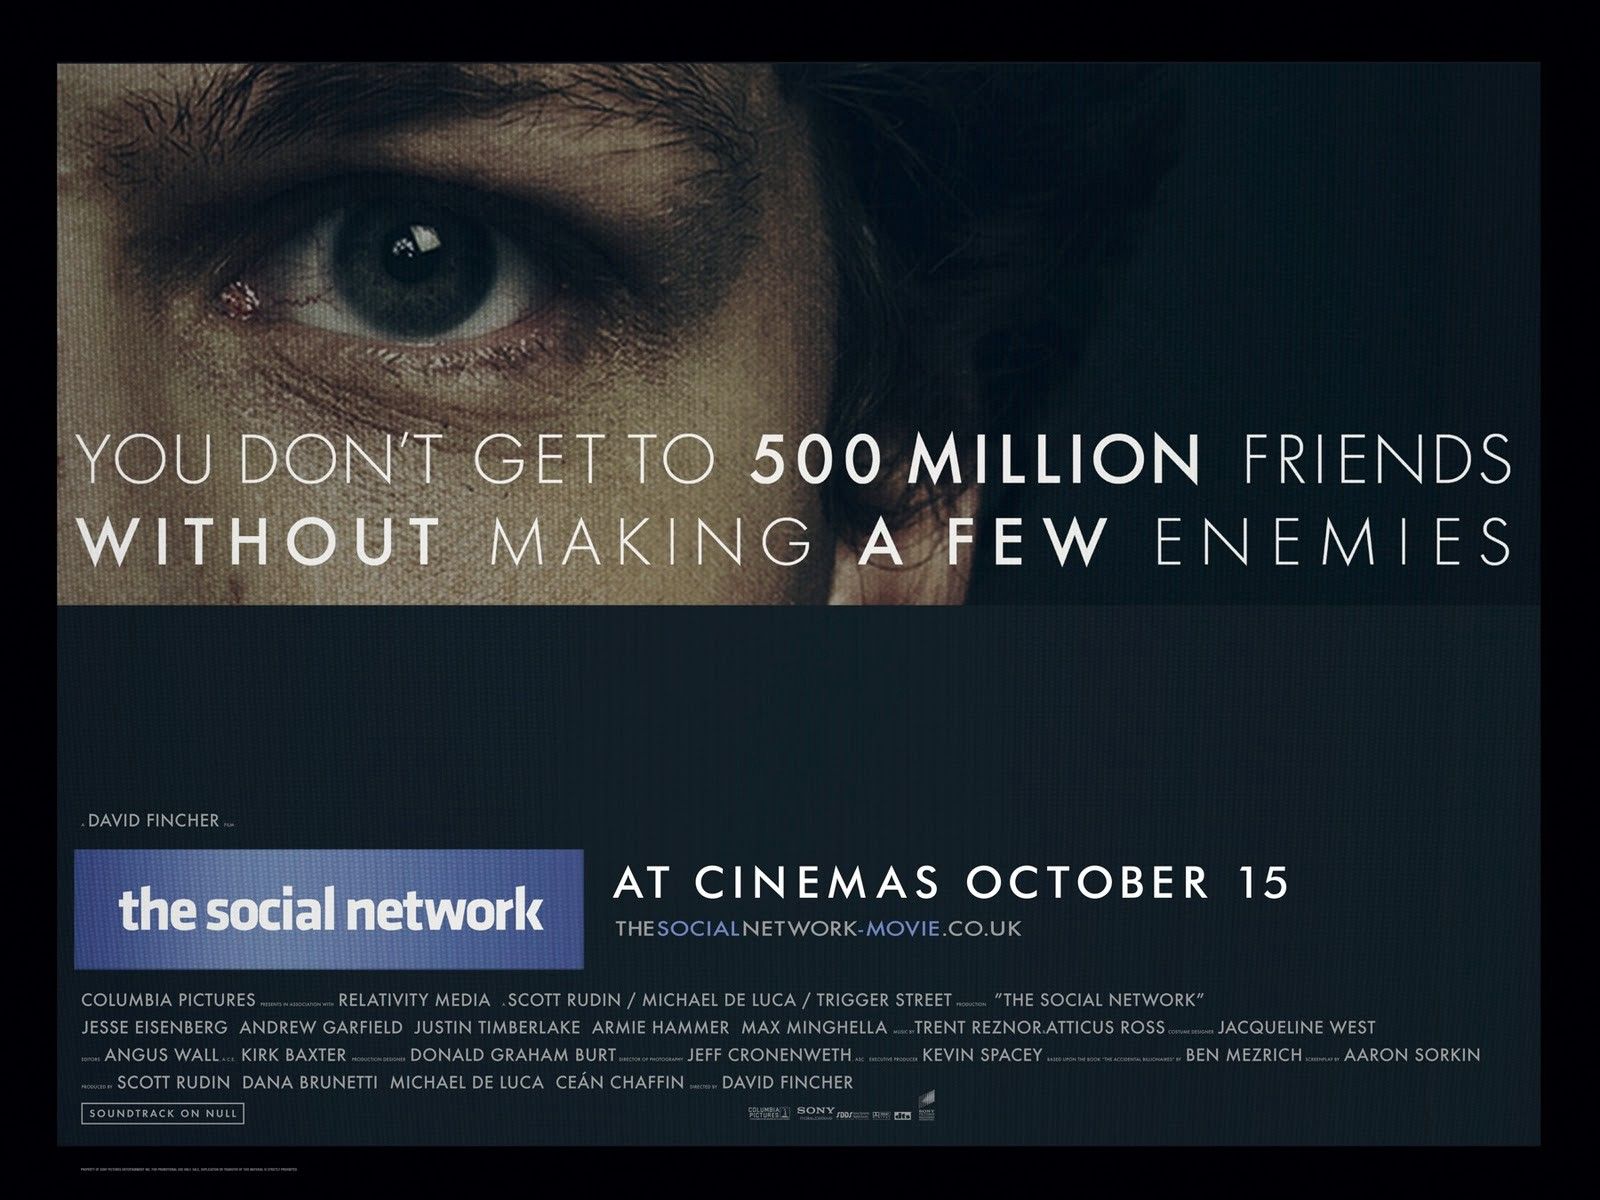 Days of Screenplays, Day 8: “The Social Network”